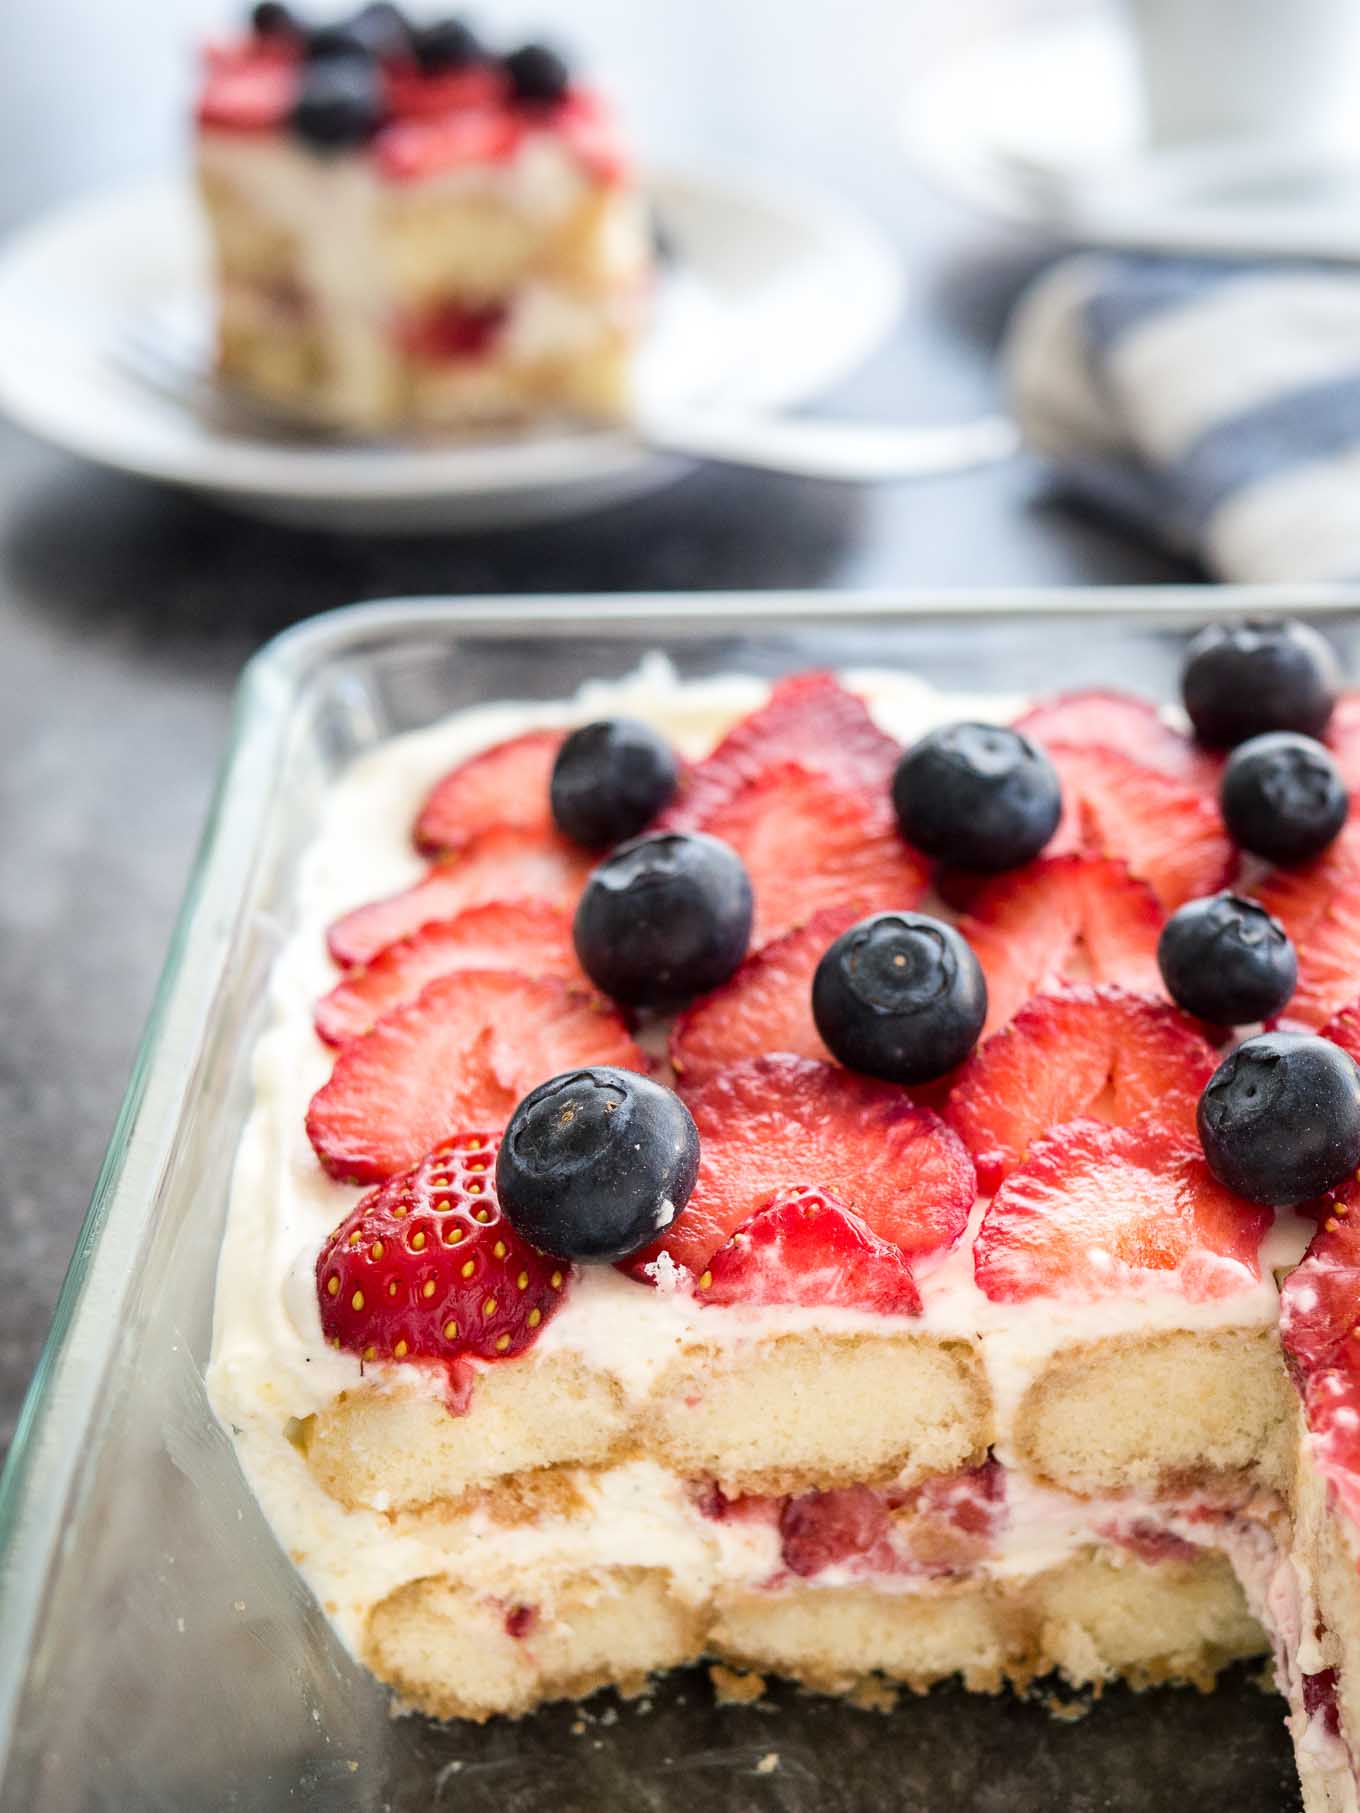 Strawberry tiramisu in a glass baking dish topped with blueberries. A piece of the tiramisu has been cut out and it is sitting on a white plate in the background next to a white coffee cup and a white and blue dishtowel.